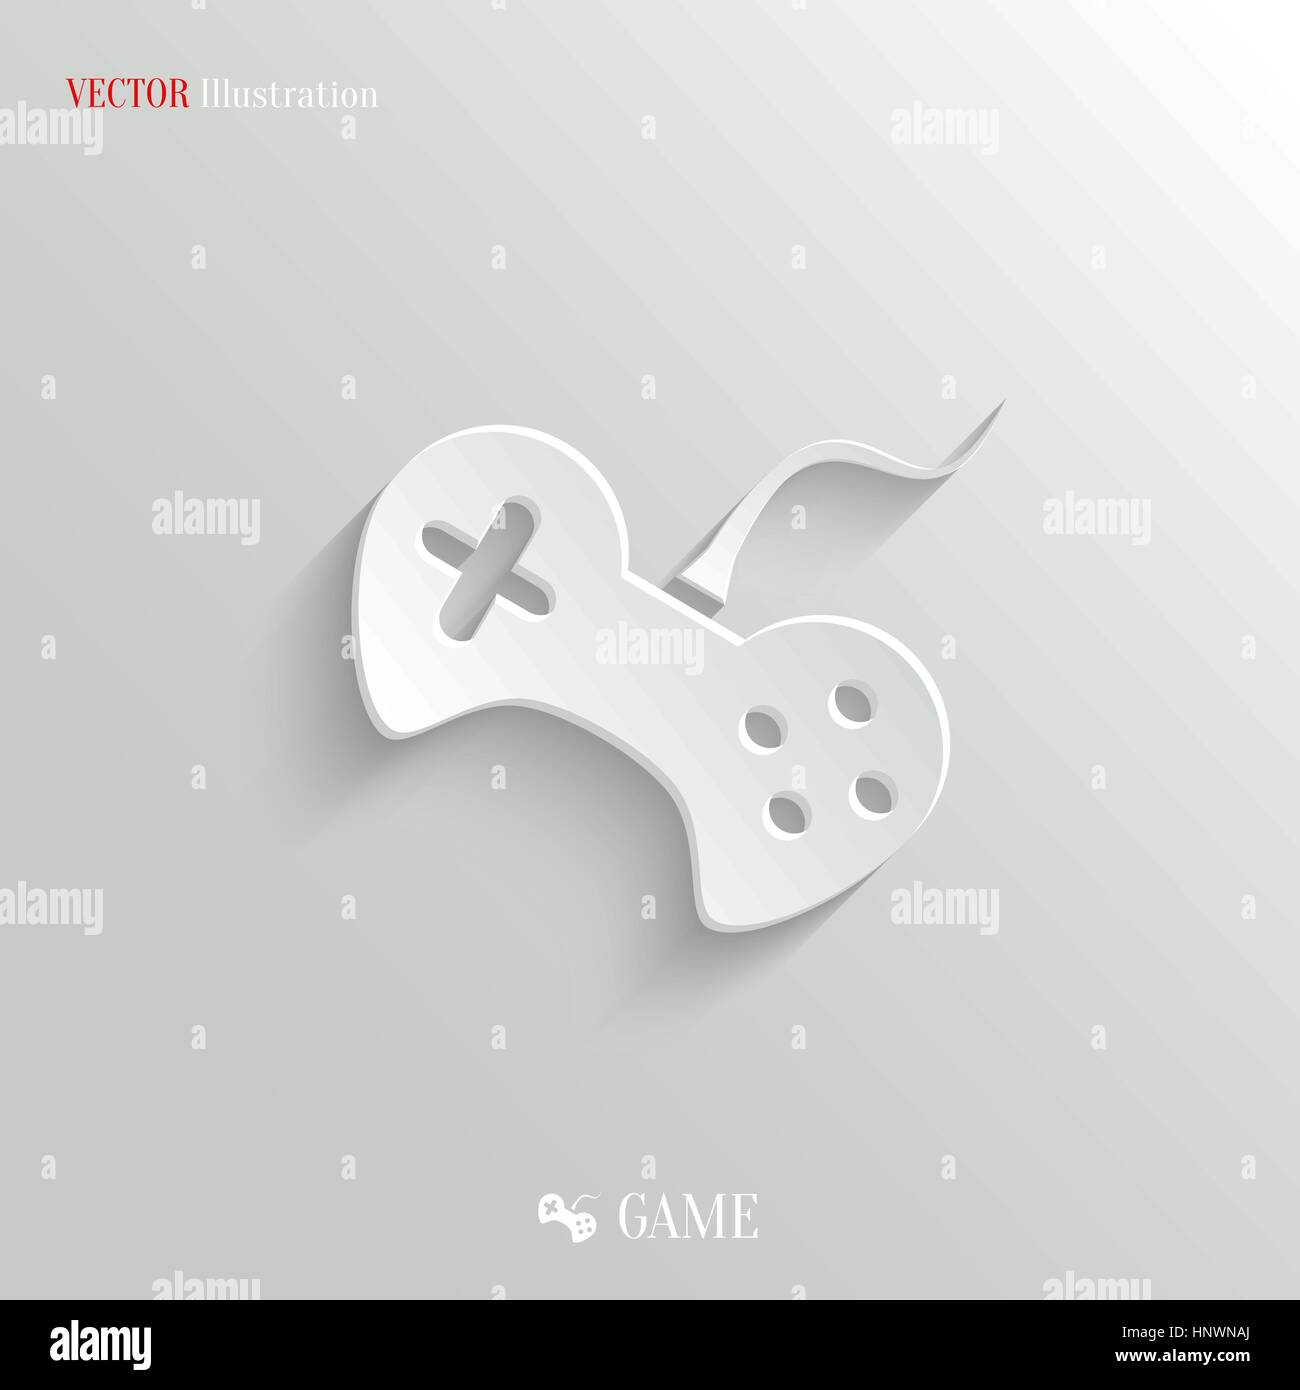 Video game icon - vector web illustration, easy paste to any background Stock Vector